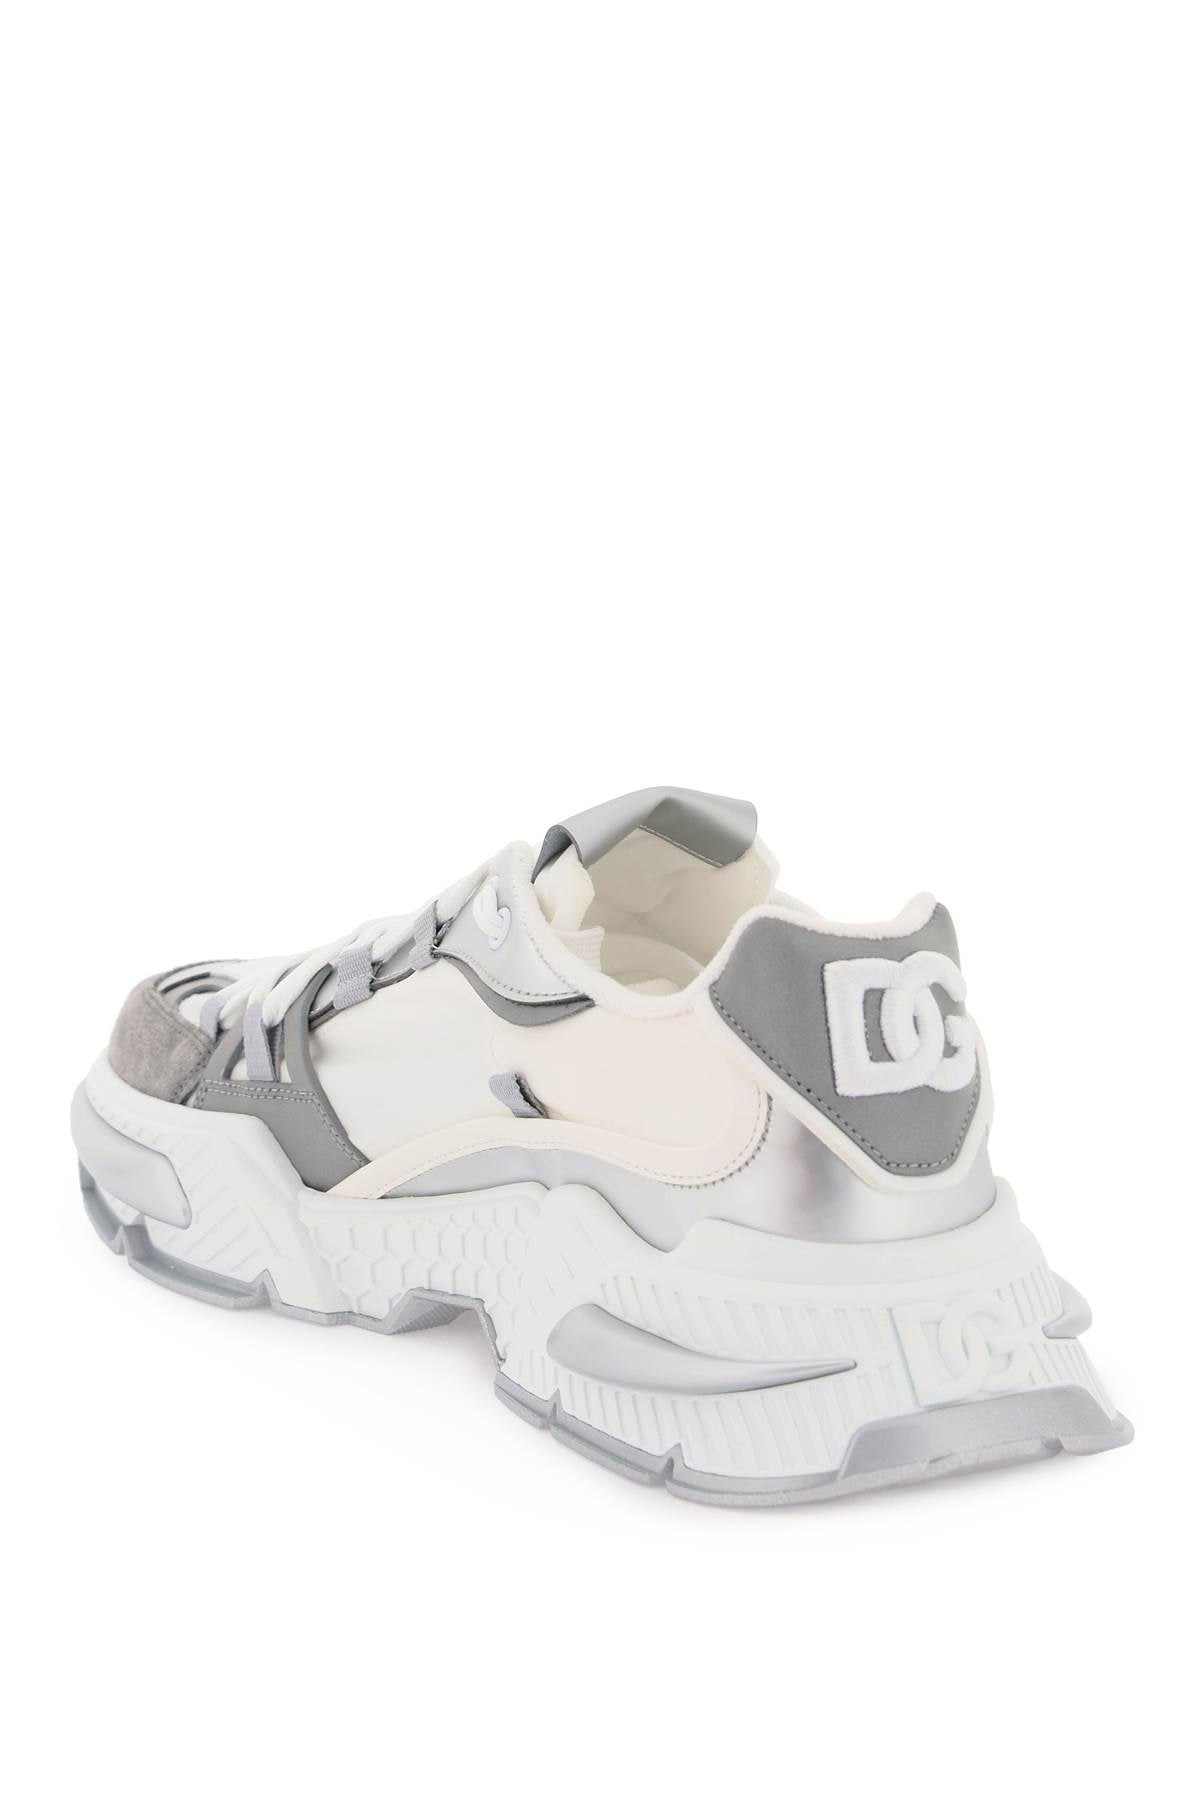 DOLCE & GABBANA Men's Silver and White Fabric Sneaker for SS24